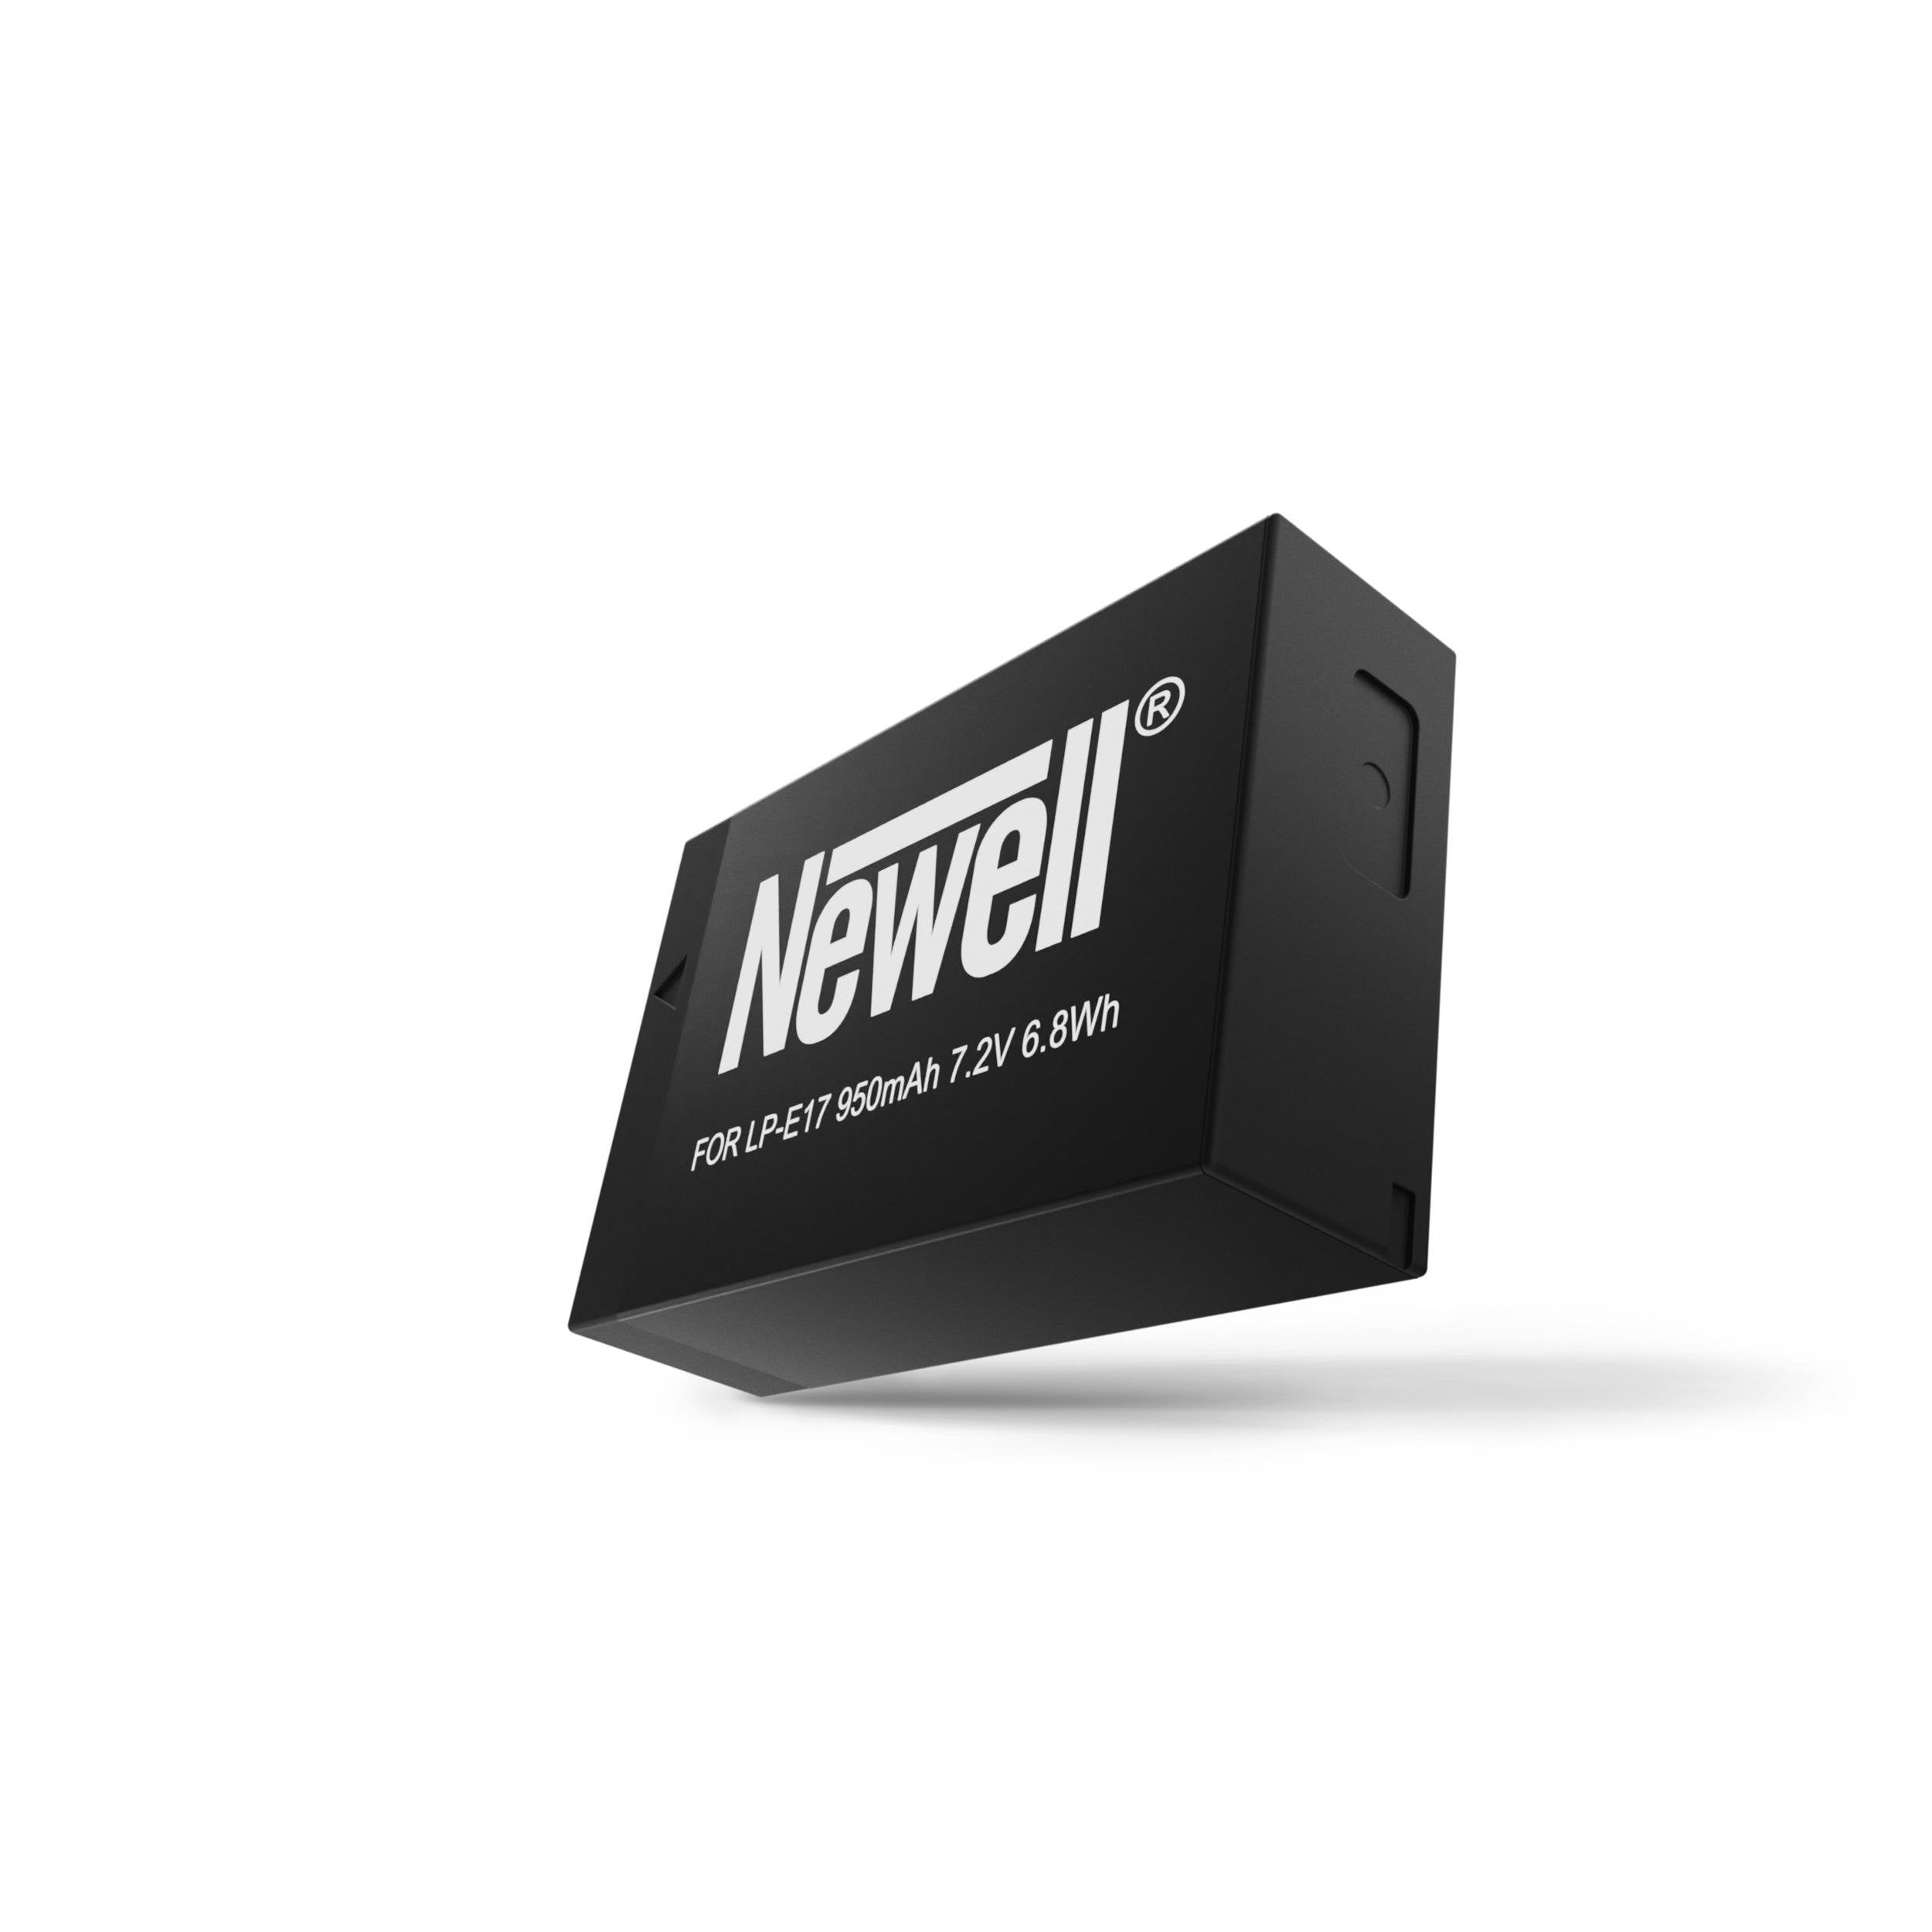 Newell LP-E17 rechargeable battery